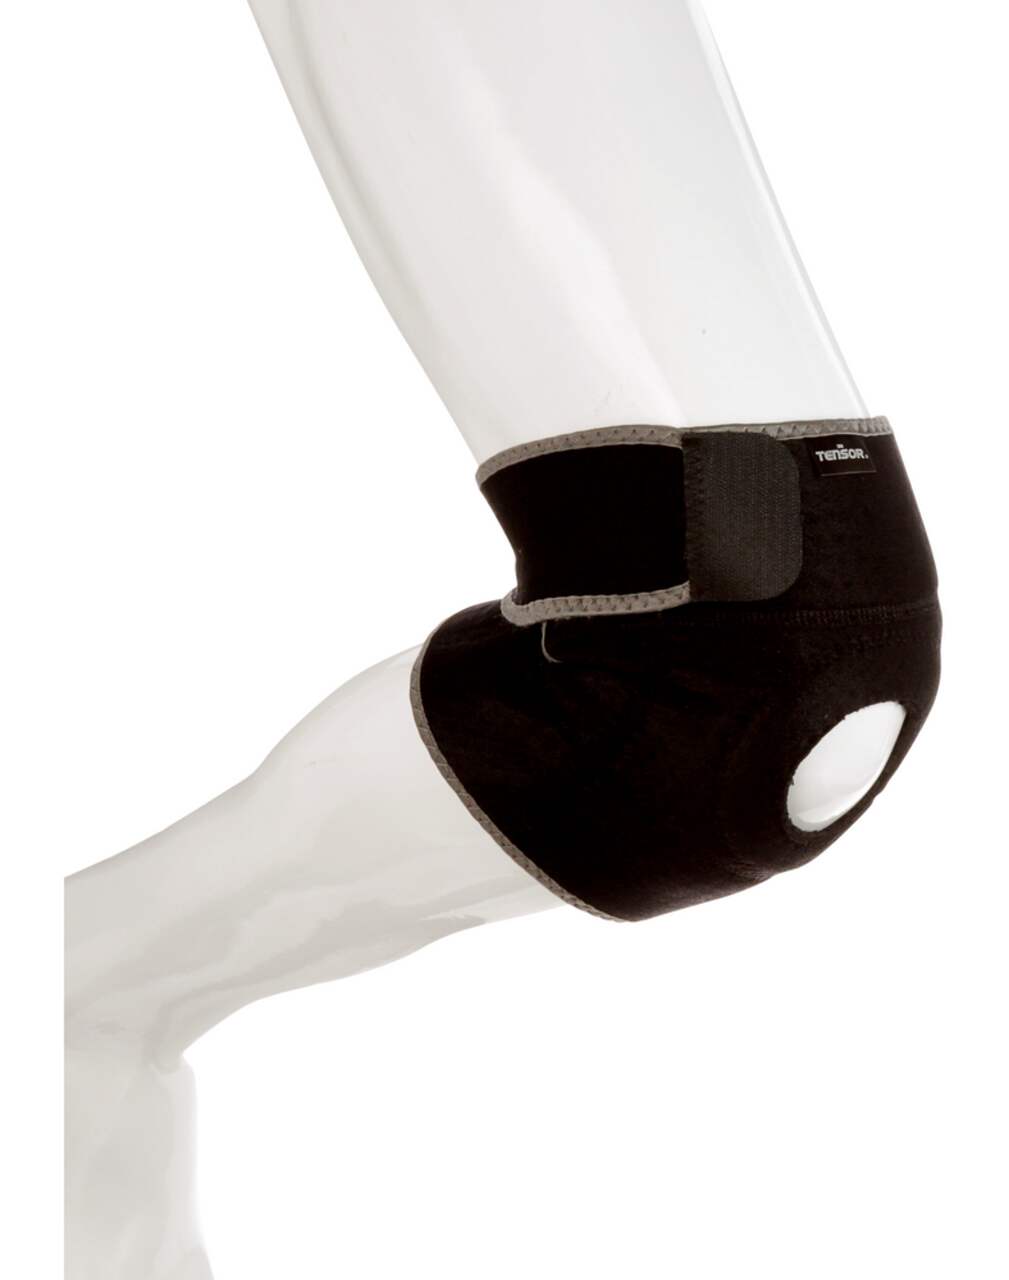 Tensor™ Adjustable Wrist Support, One Size